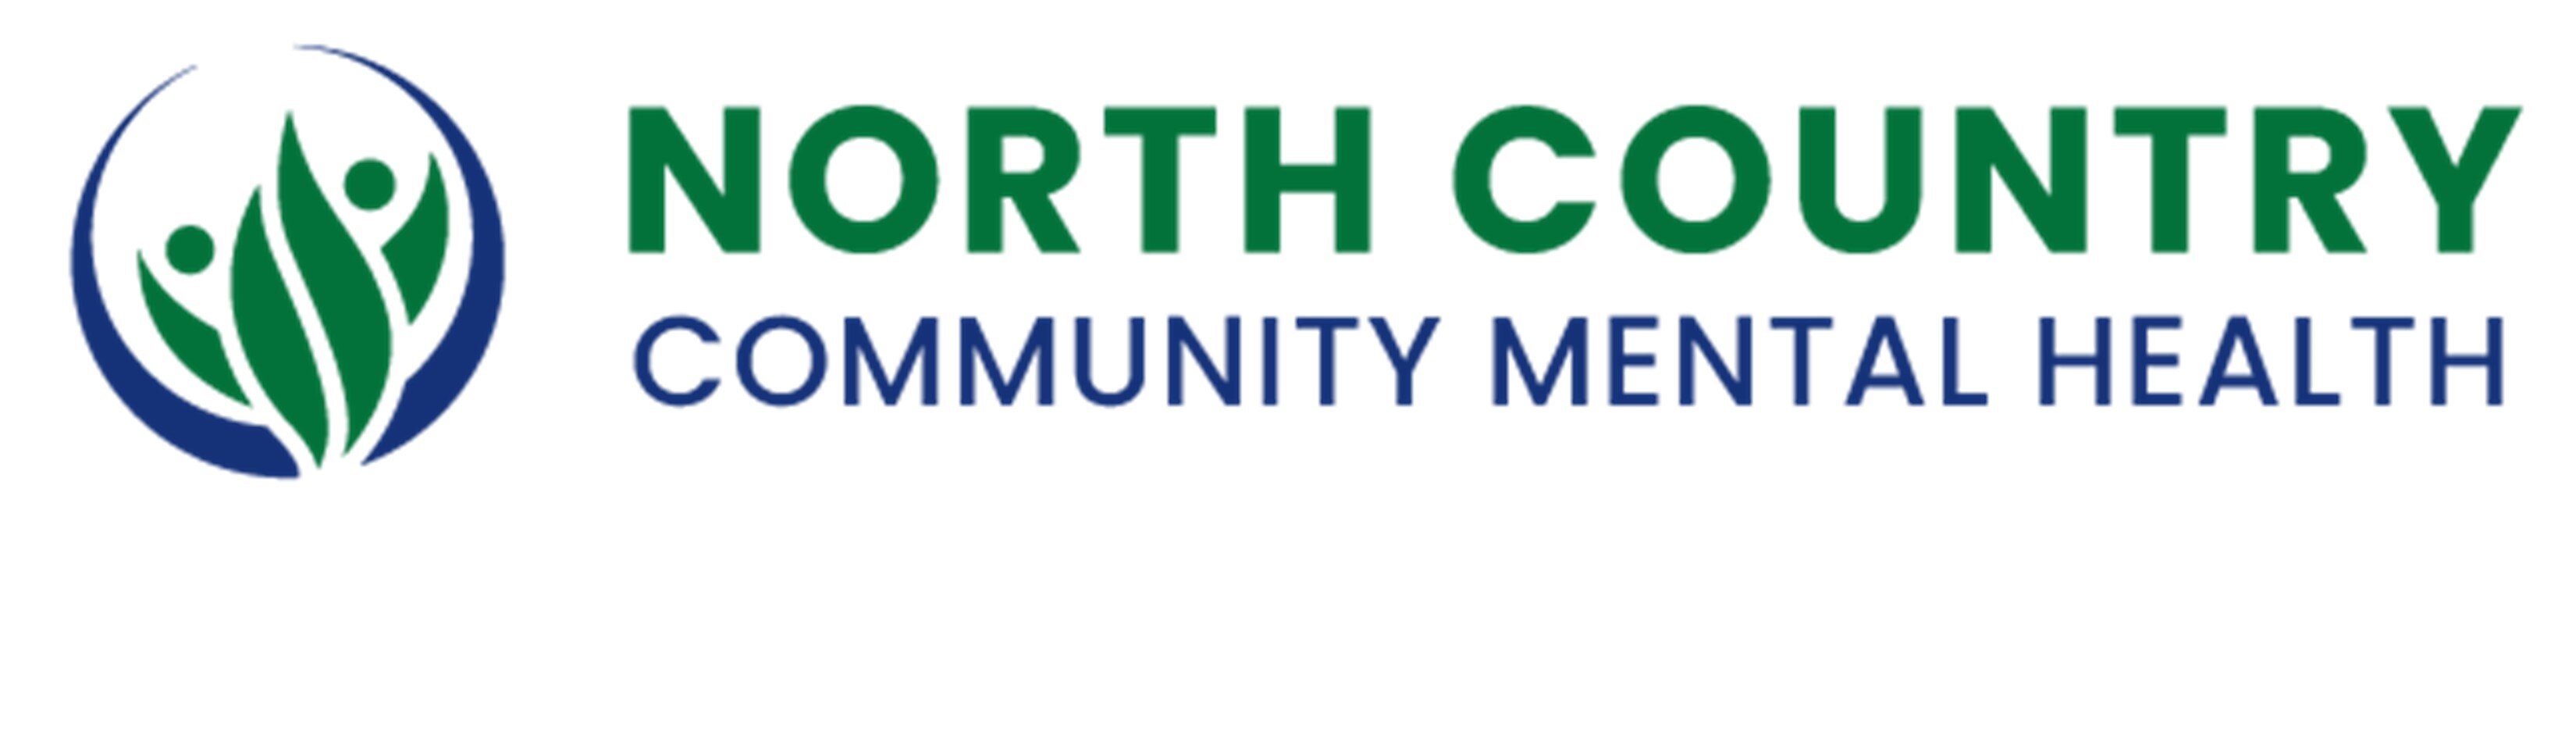 North Country Community Mental Health